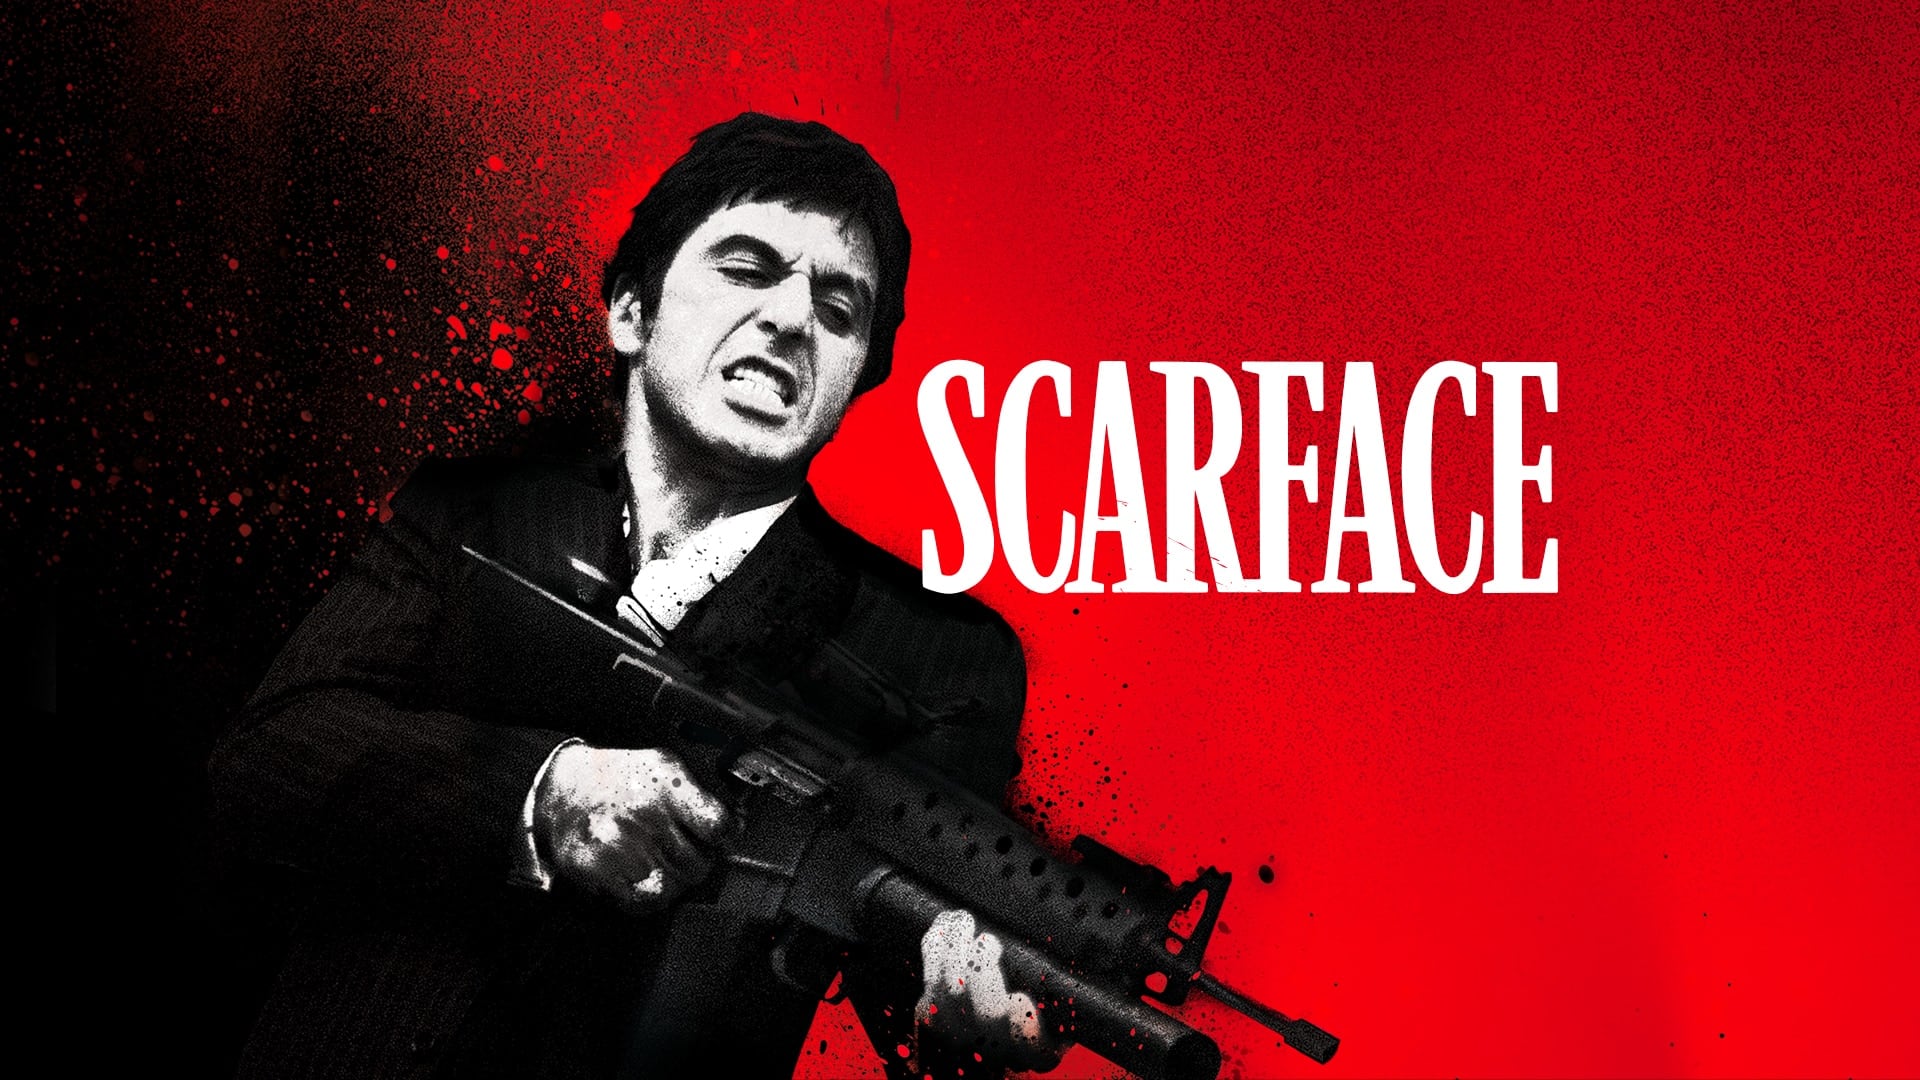 Watch Scarface Online | Stream Full Movies